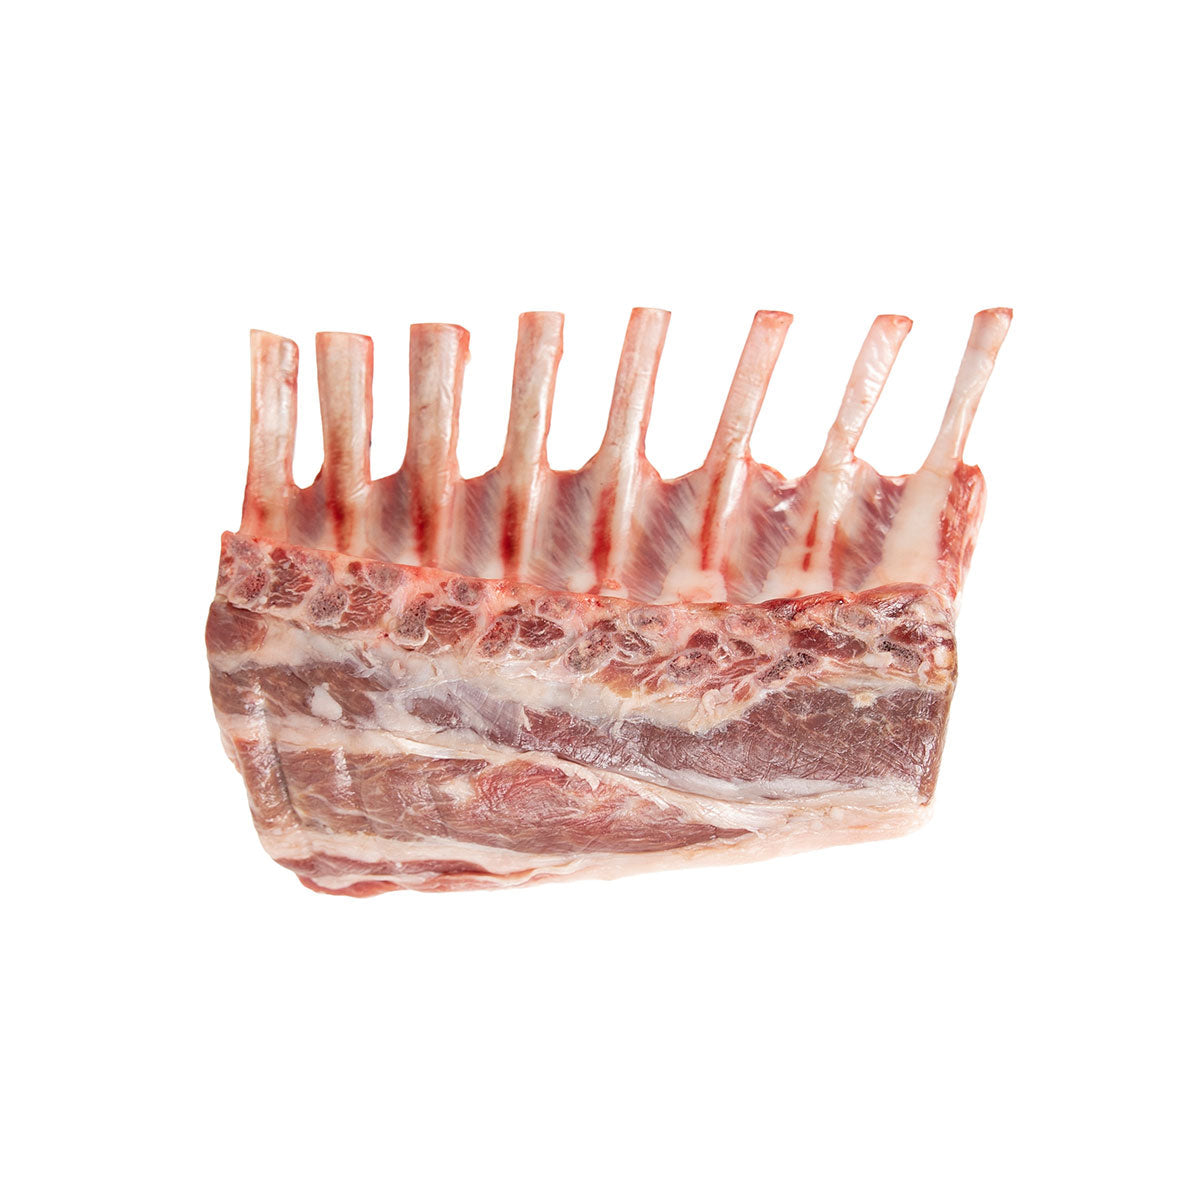 Atlantic Veal & Lamb Frozen Frenched Rack of Lamb